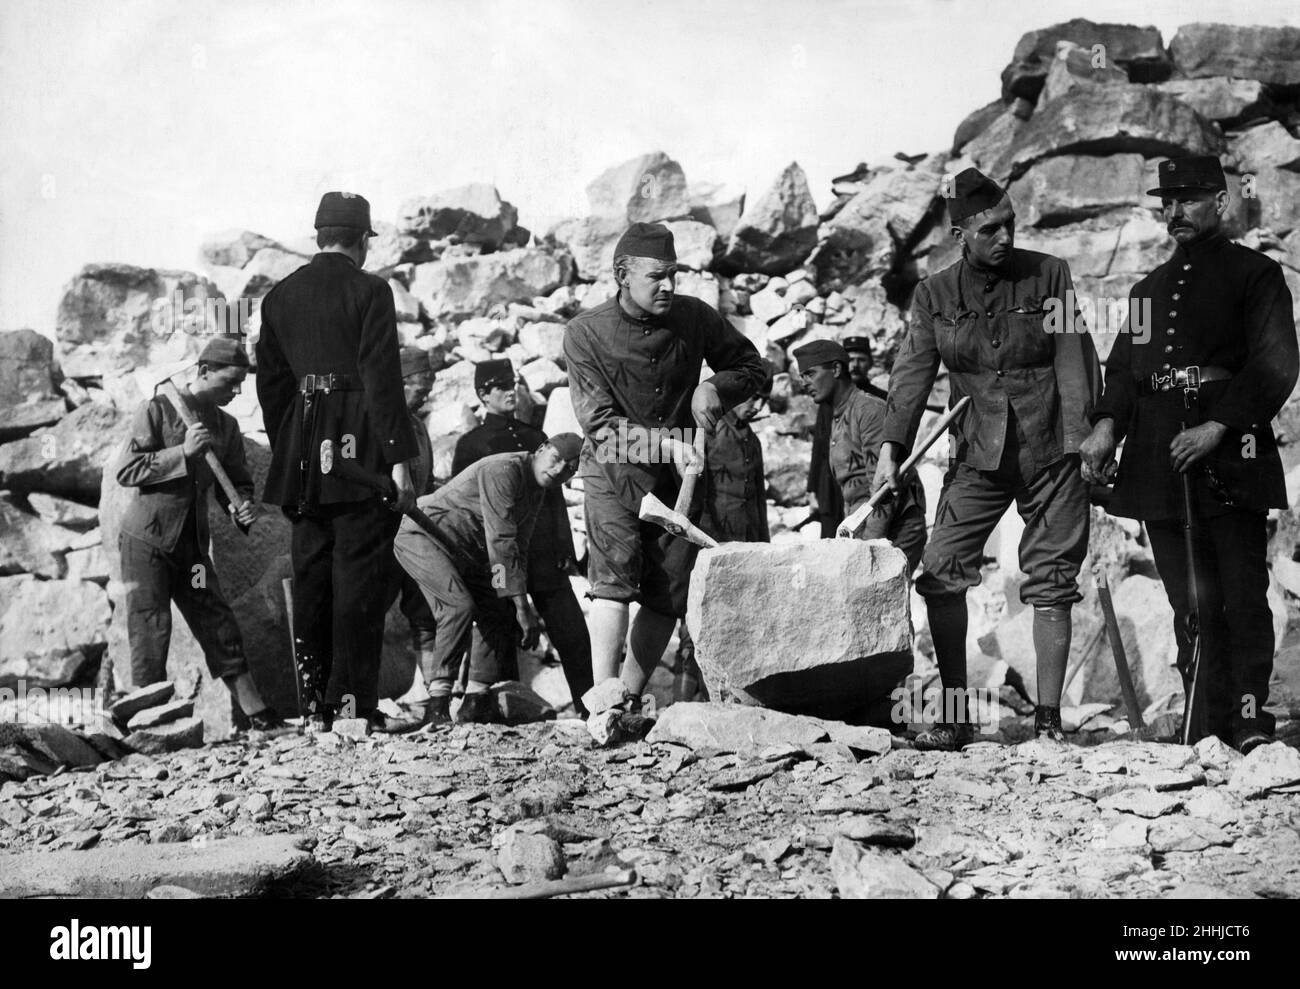 Convict film which was censored. A pictured drama by the Anchor Film Company, dealing with the escape of a convict from Portland, portions of which have been banned by the censor. The play was prepared in a private quarry, and the banned portions, which include the bribed warder scene, are vital. Pictured, the bribed warder passing instructions. Warder who has been bribed by outside friend, passing on plug of tobacco which contains instructions on how to escape. 21st December 1913. Stock Photo